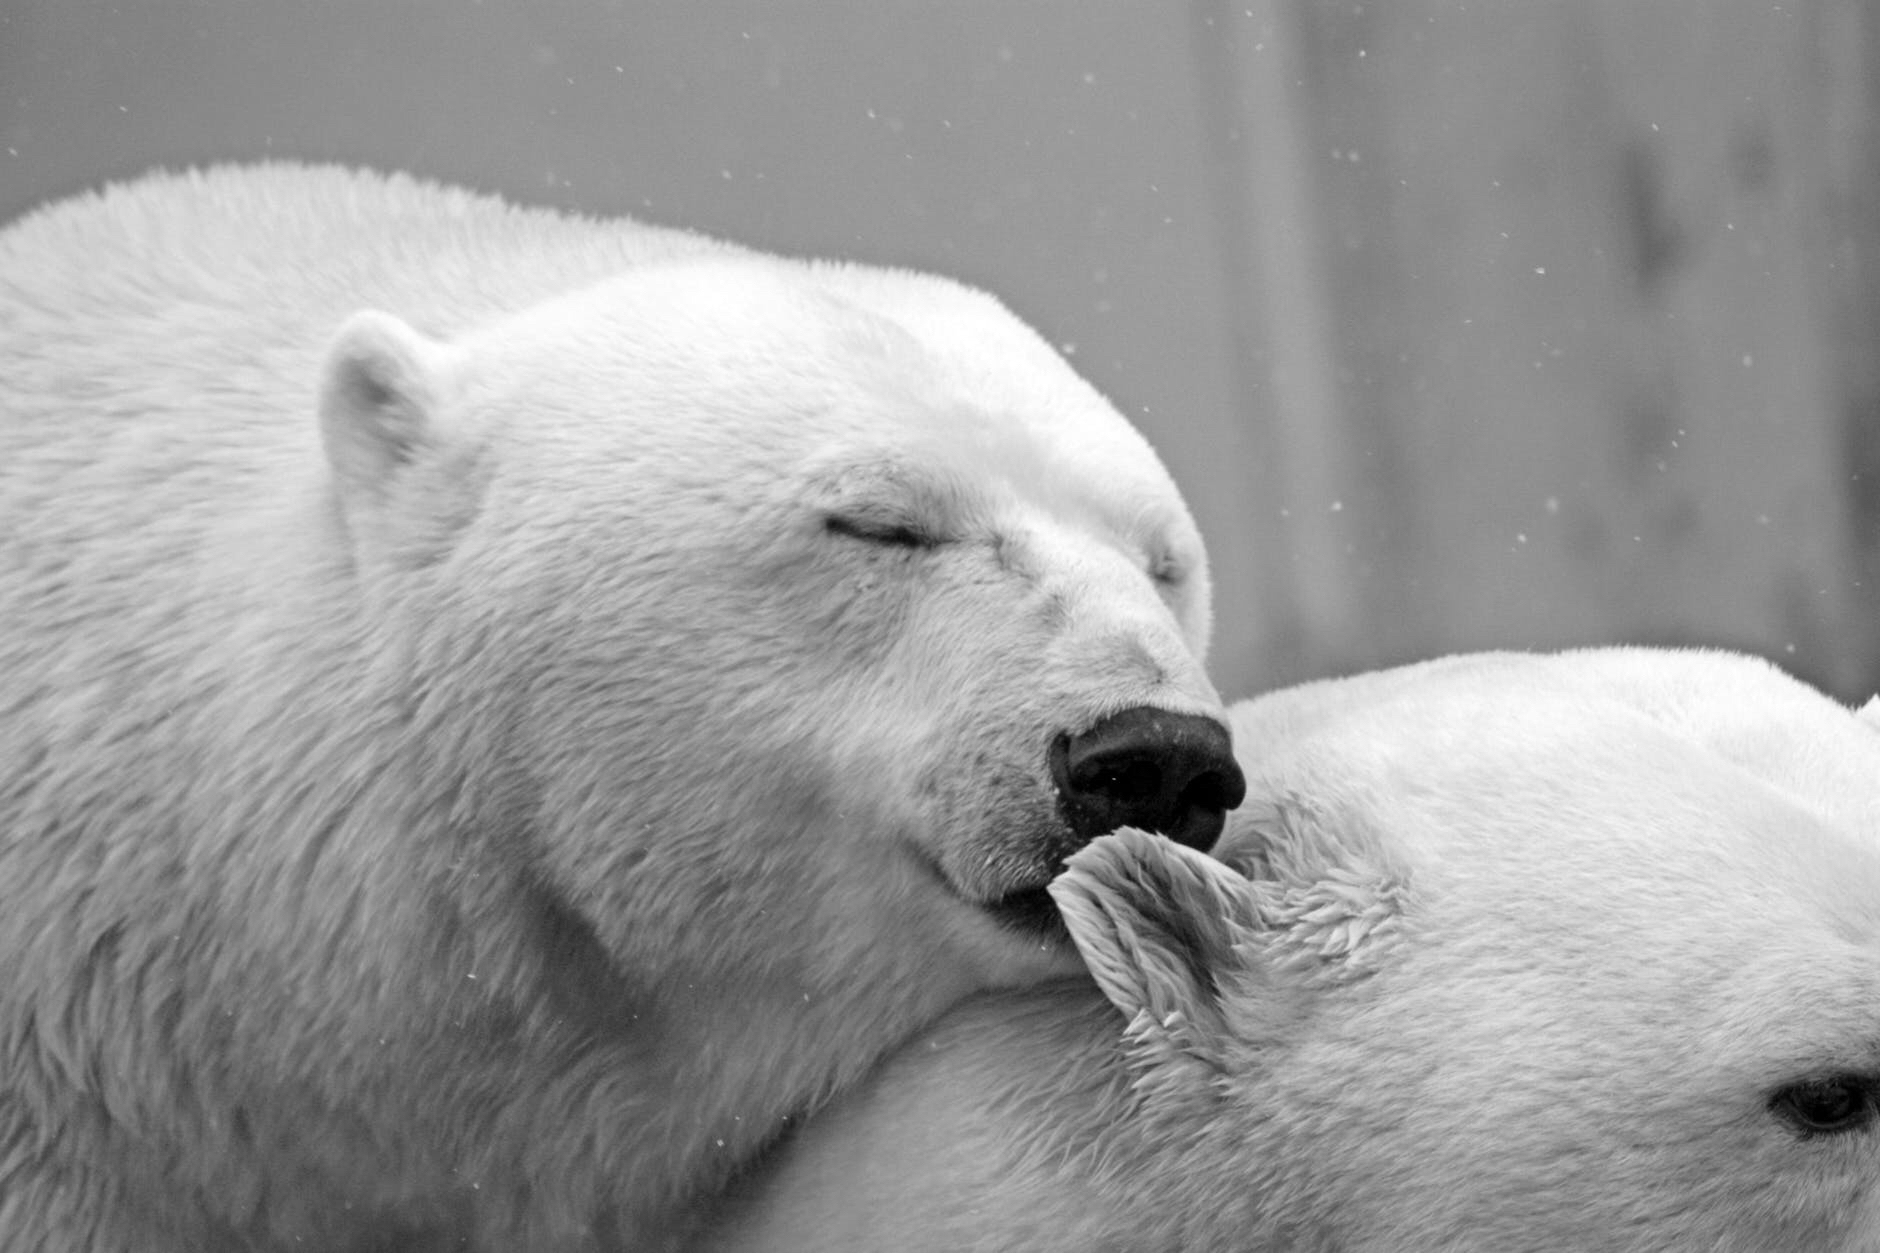 International Polar Bear Day is an annual event celebrated every February 27 to raise awareness about the conservation of the polar bear.